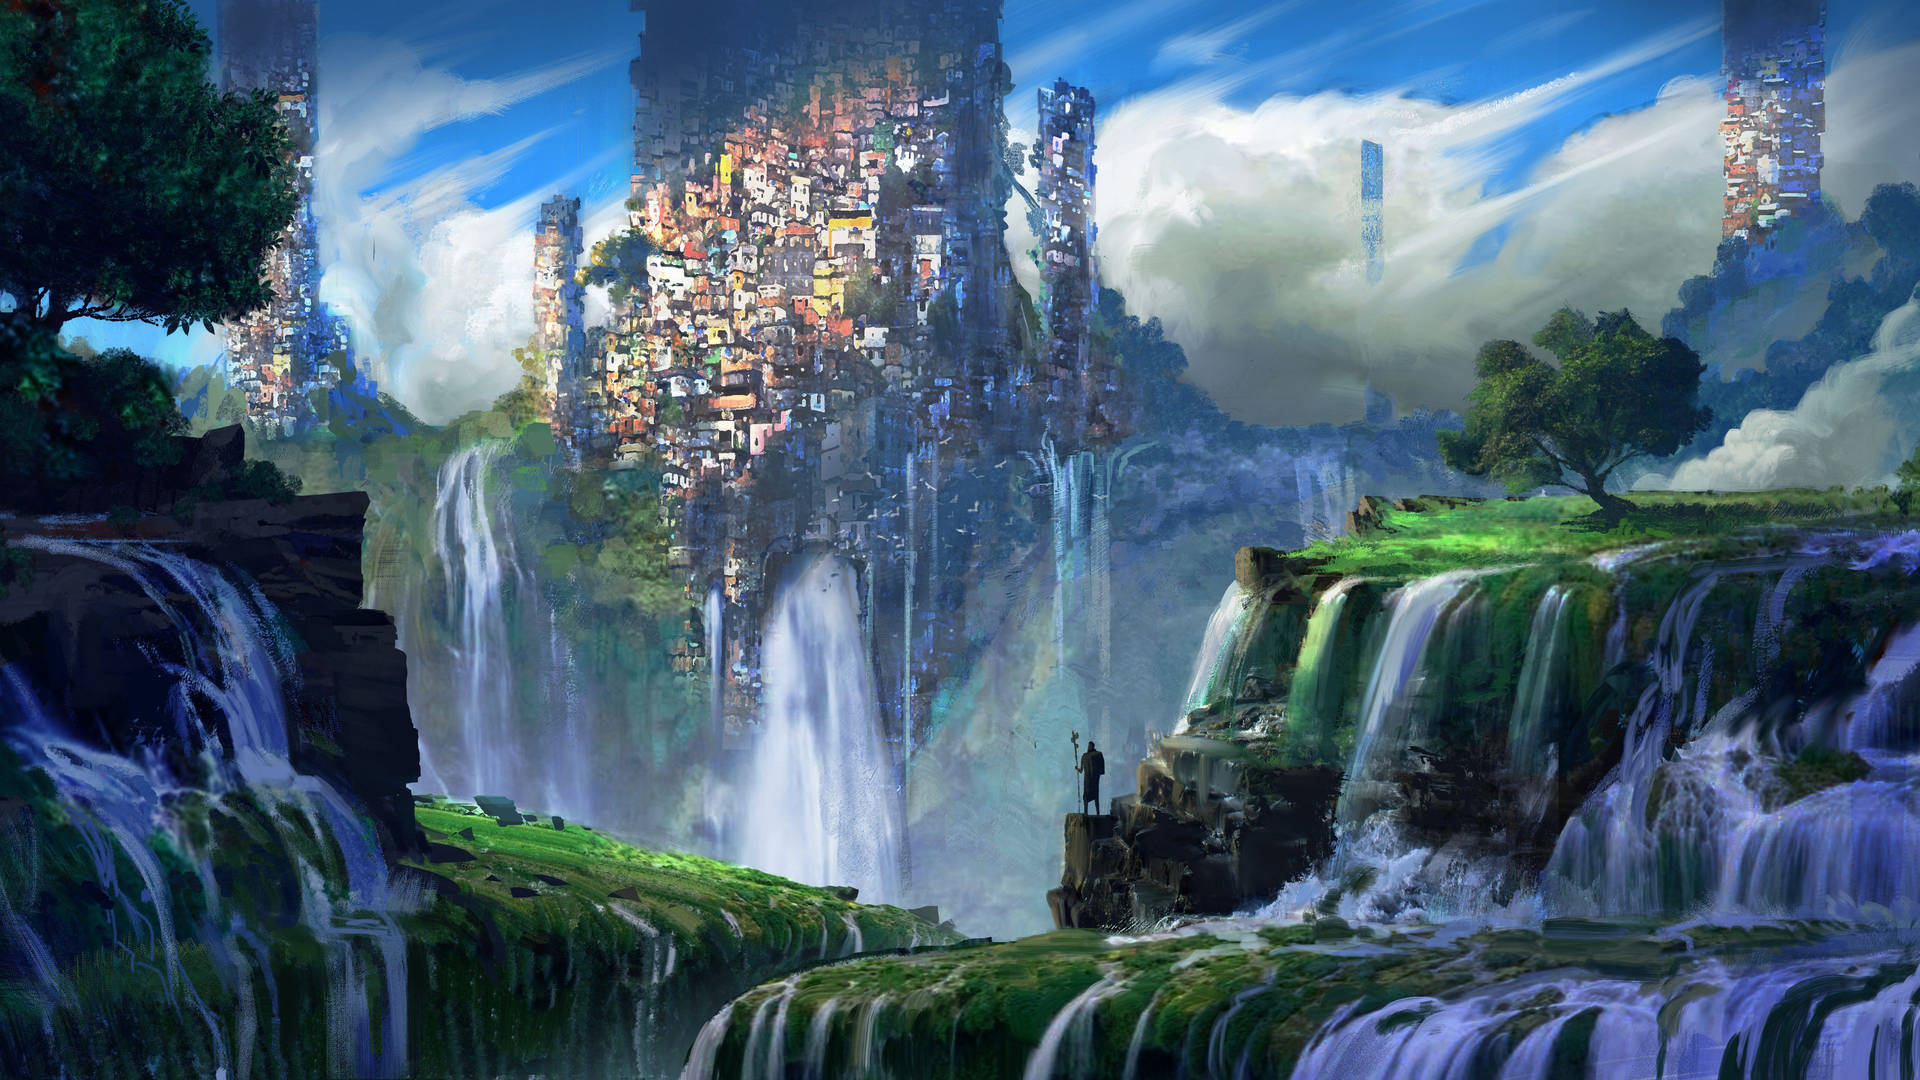 Waterfall And City Slums